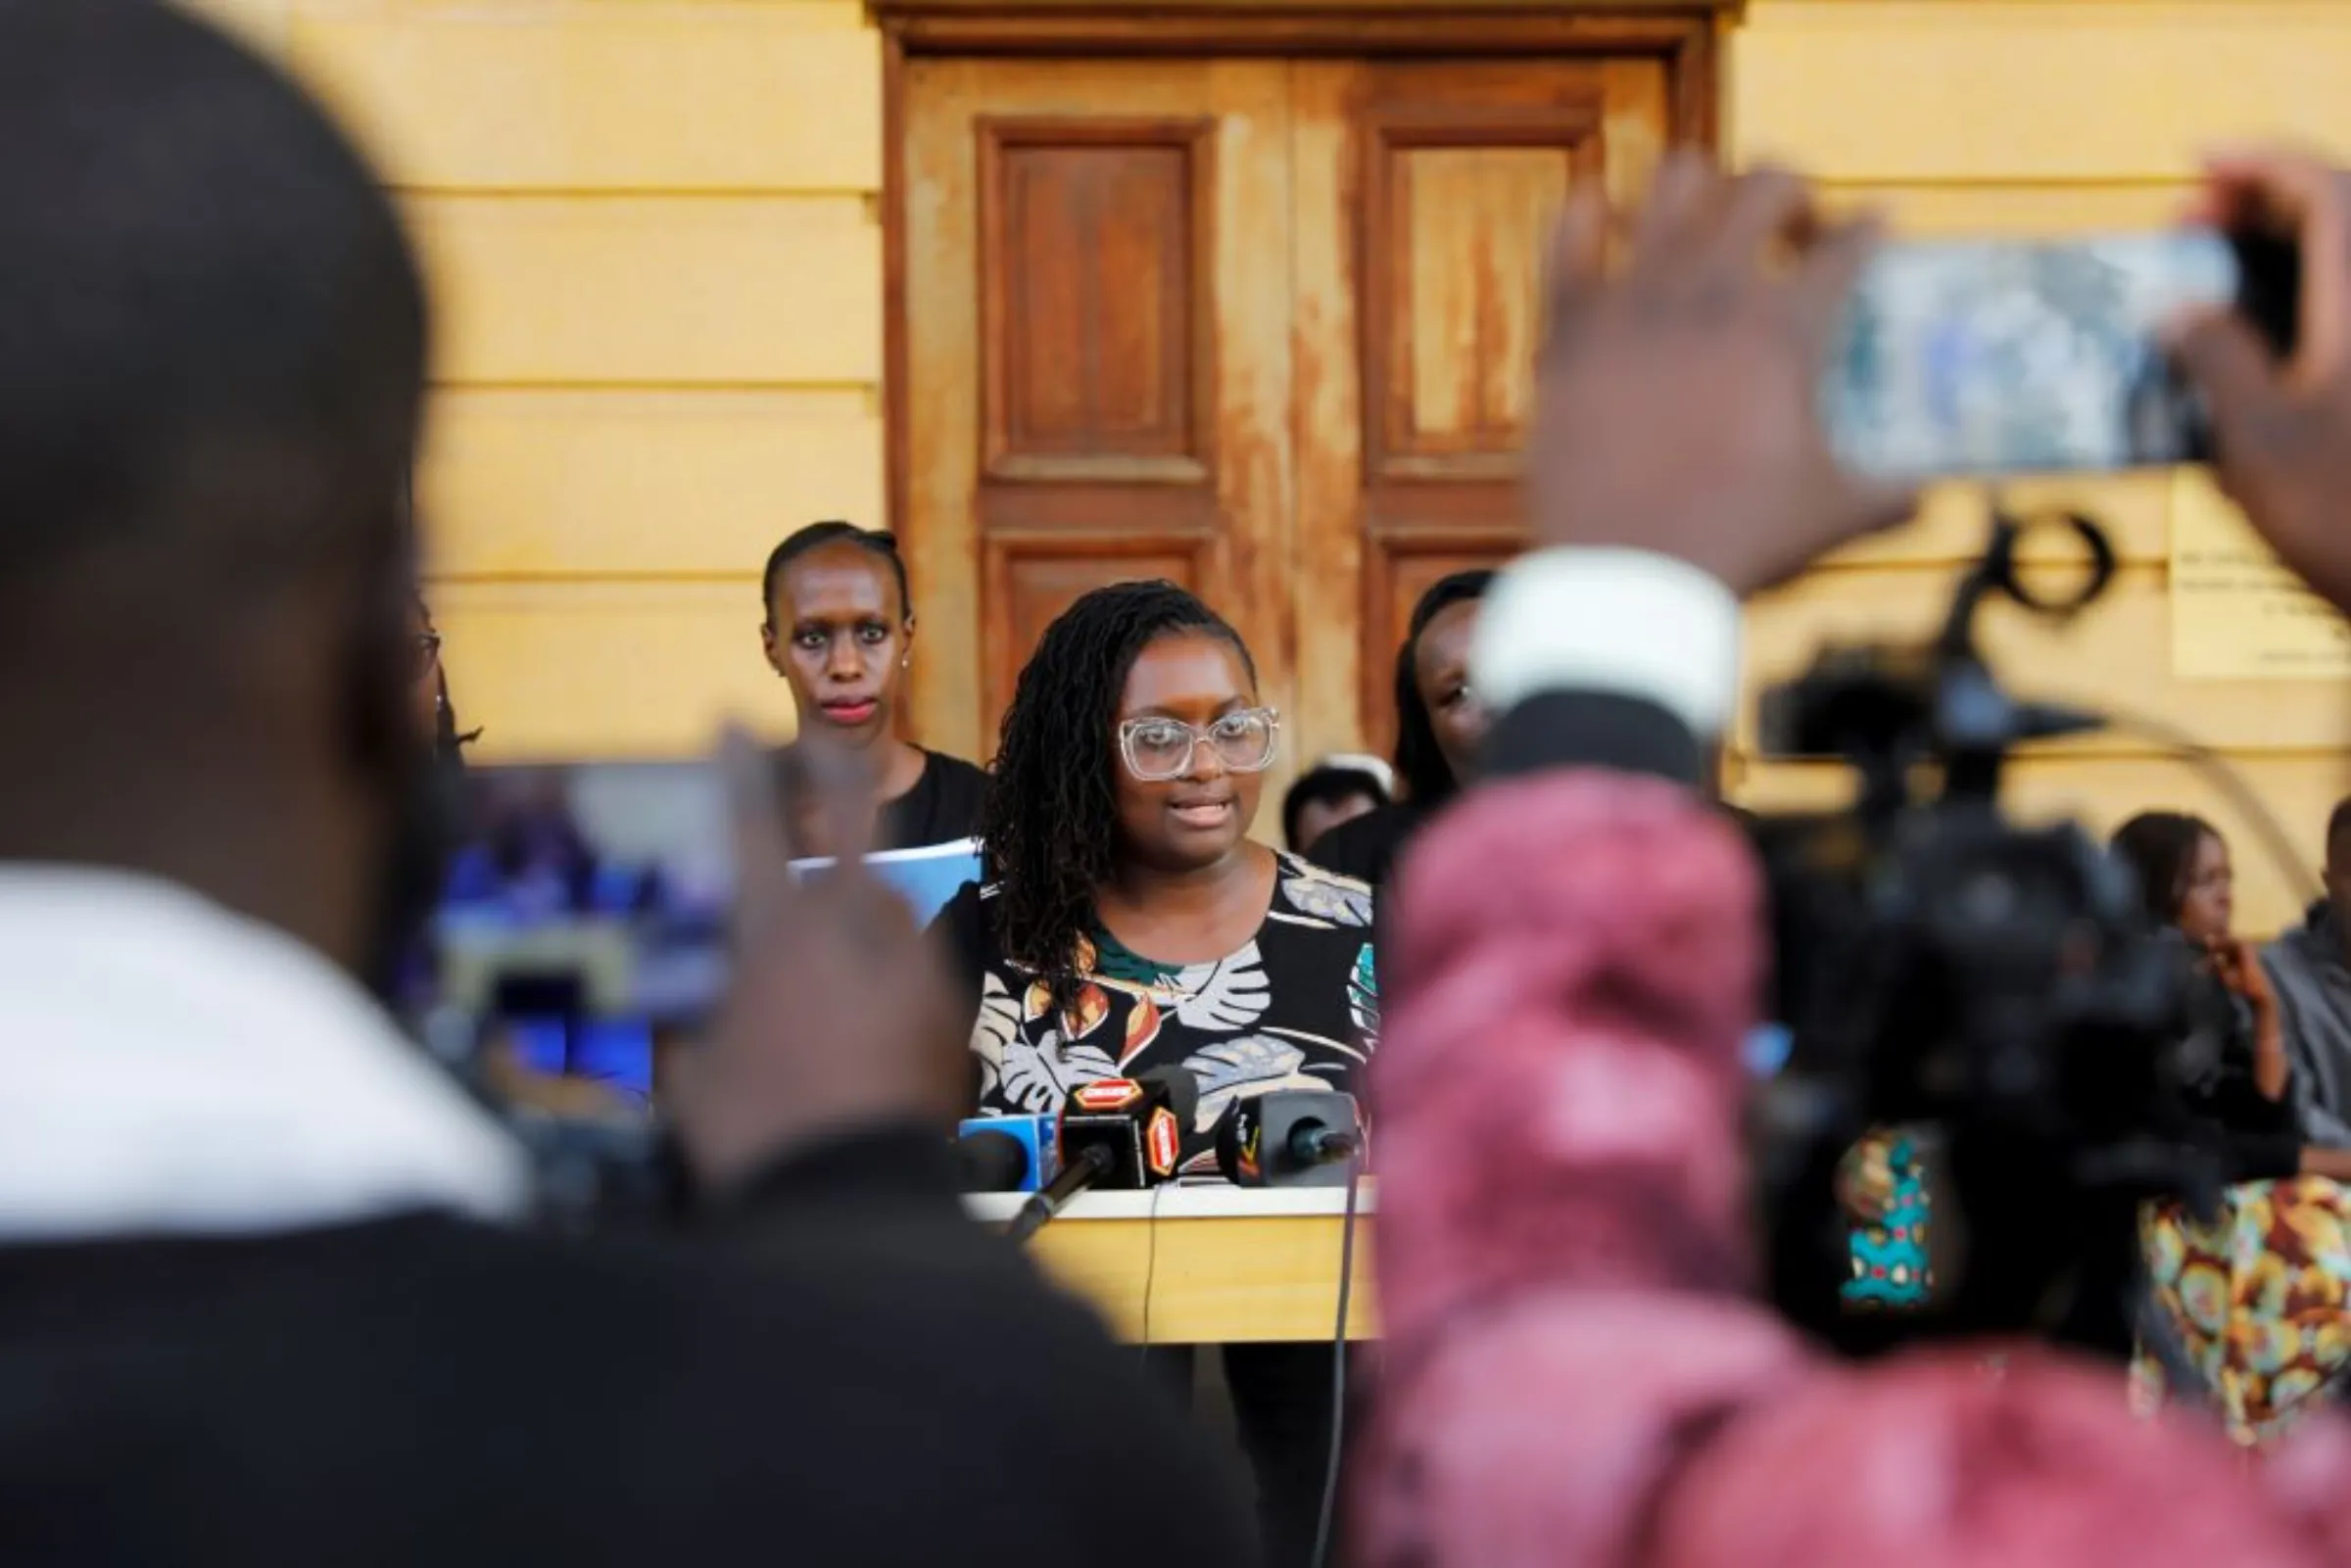 Mercy Mutemi, a lawyer representing a former content moderator, speaks during a news conference after filing a lawsuit against Facebook owner Meta Platforms Inc and its local content moderation contractor Sama, at the Milimani Law Courts in Nairobi, Kenya, May 10, 2022